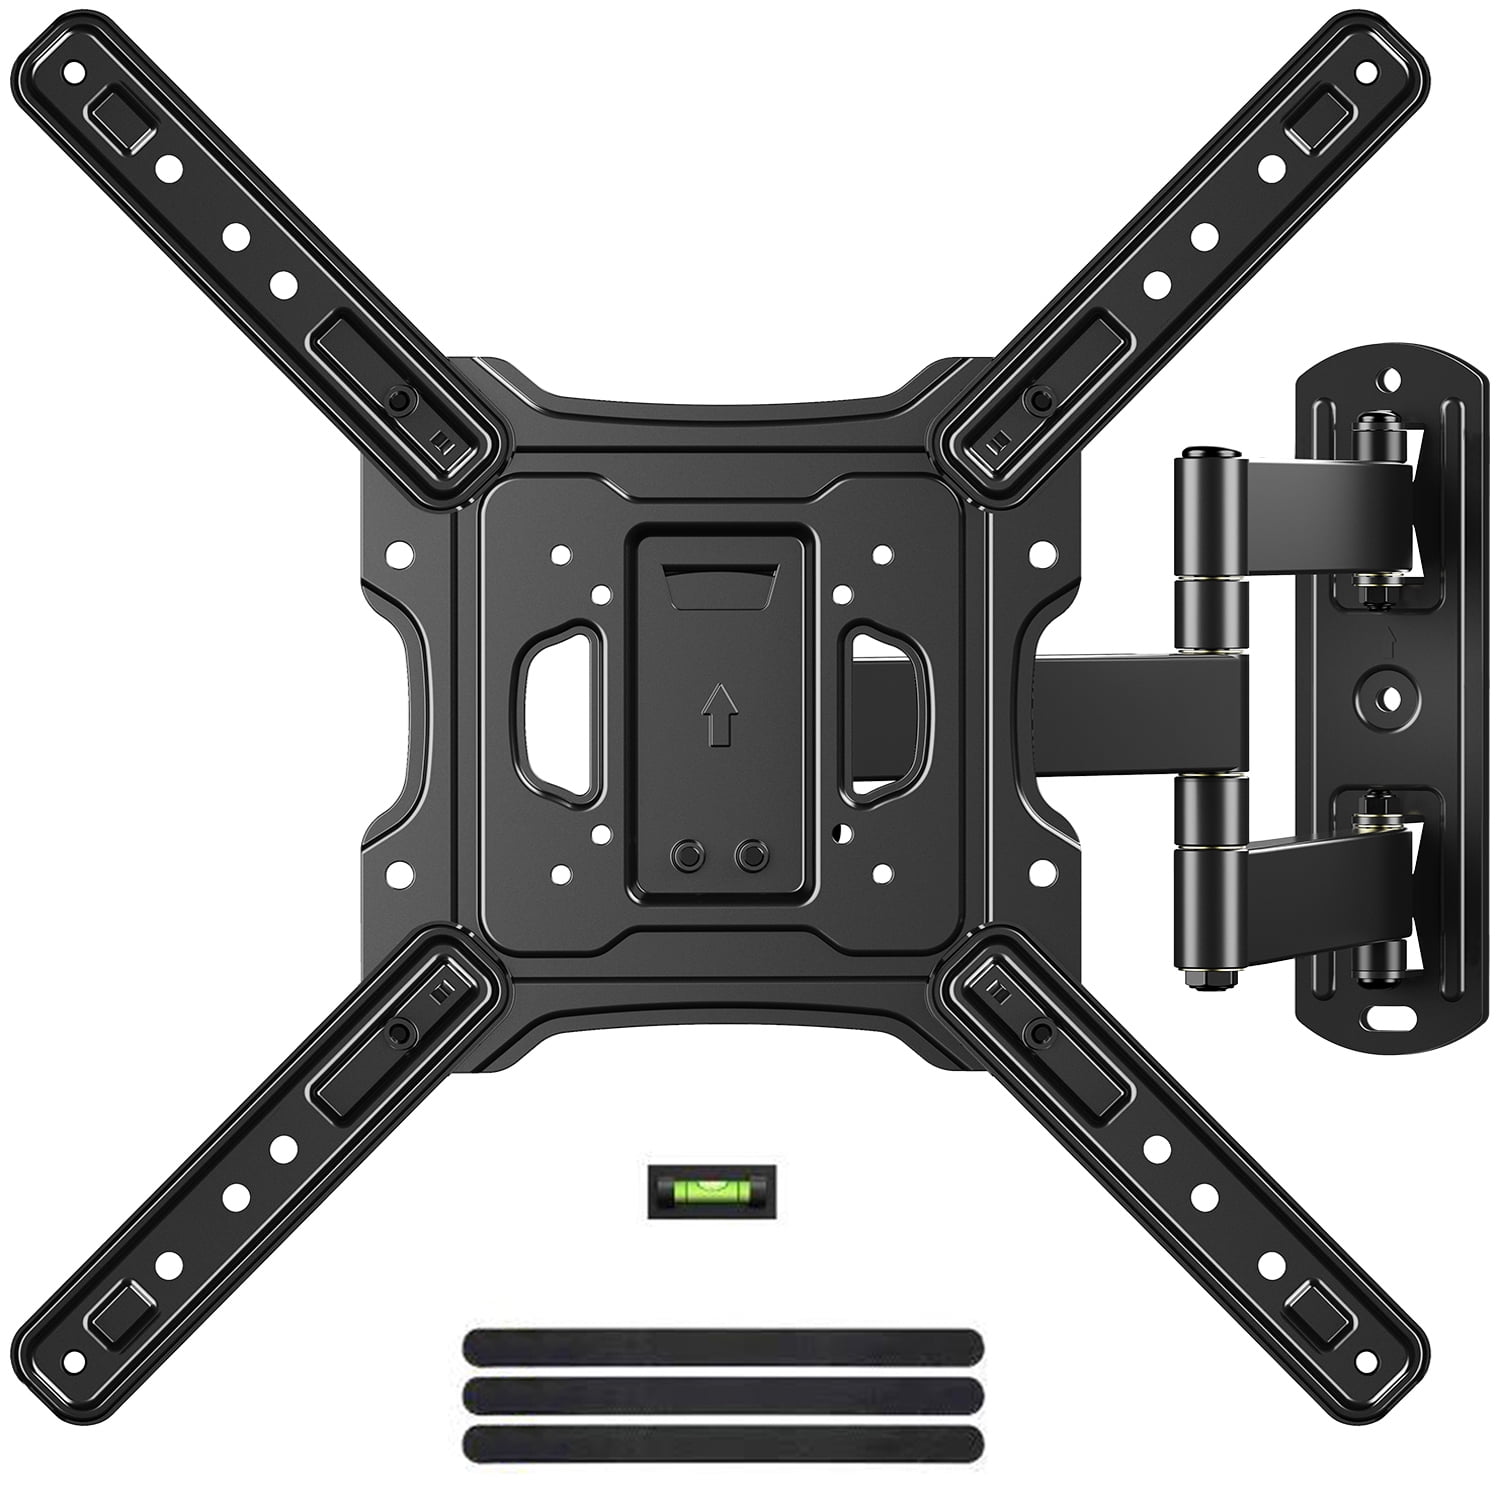 MOUNT Full Motion TV Wall Mount for |23-55"| TV Articulating Arms Swivels Tilts Extension Rotation Max VESA 400x400mm Weight up to 77lbs - Walmart.com